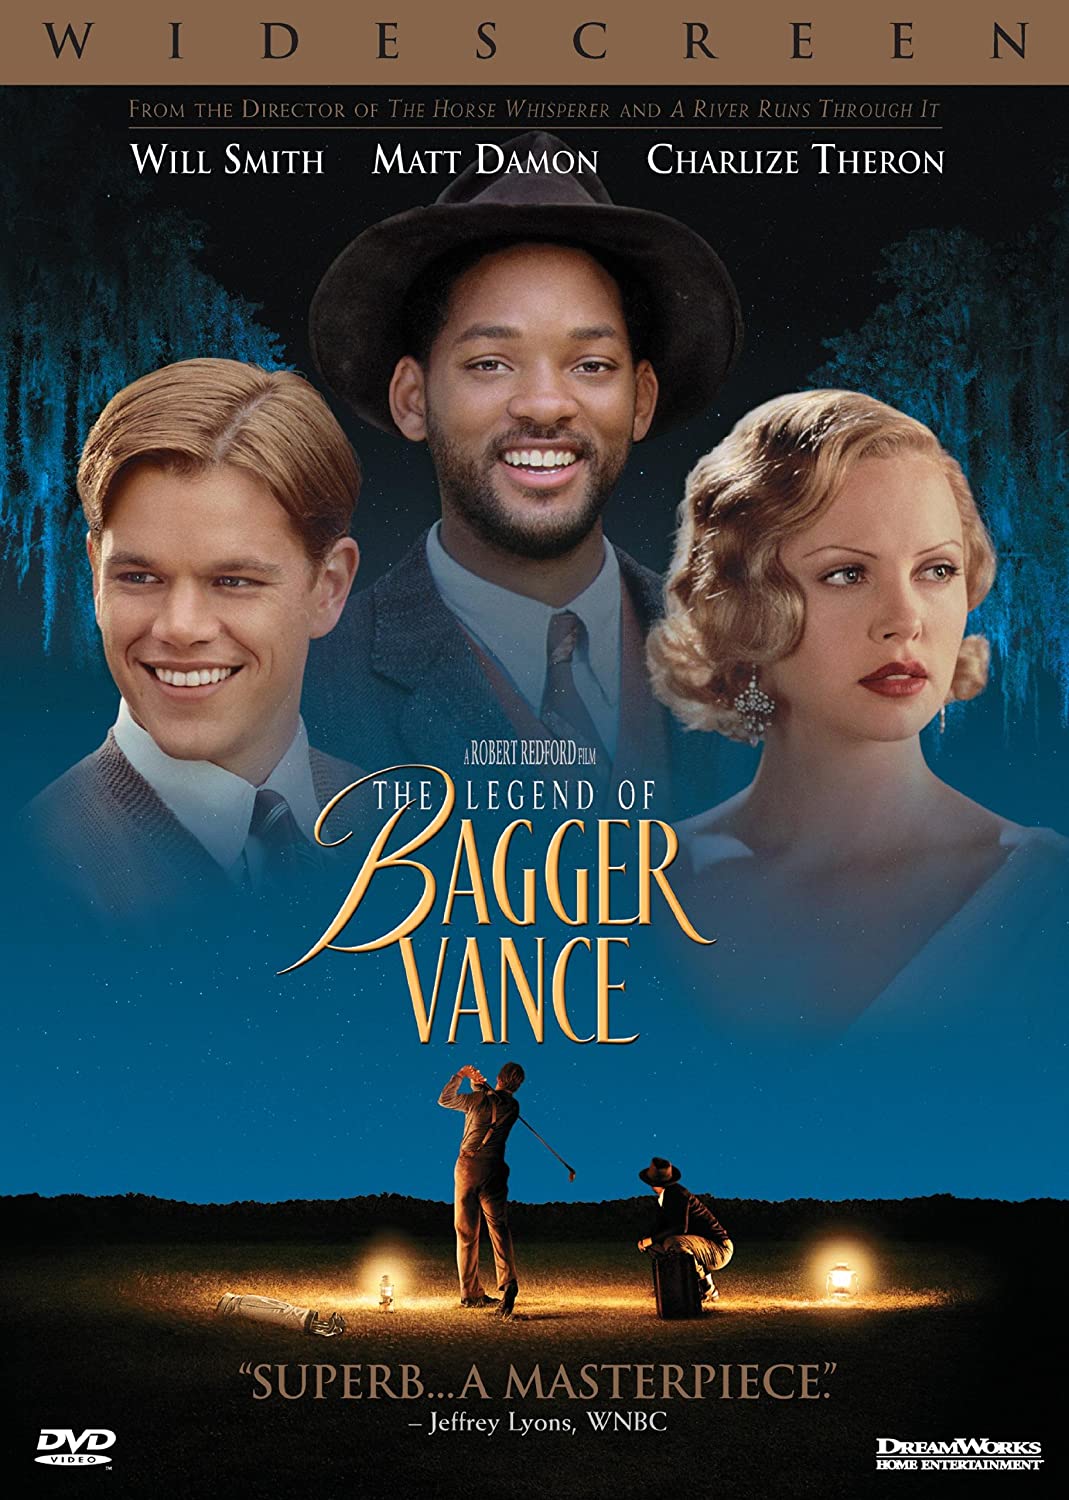 You are currently viewing (Old) Film Review: The Legend of Bagger Vance